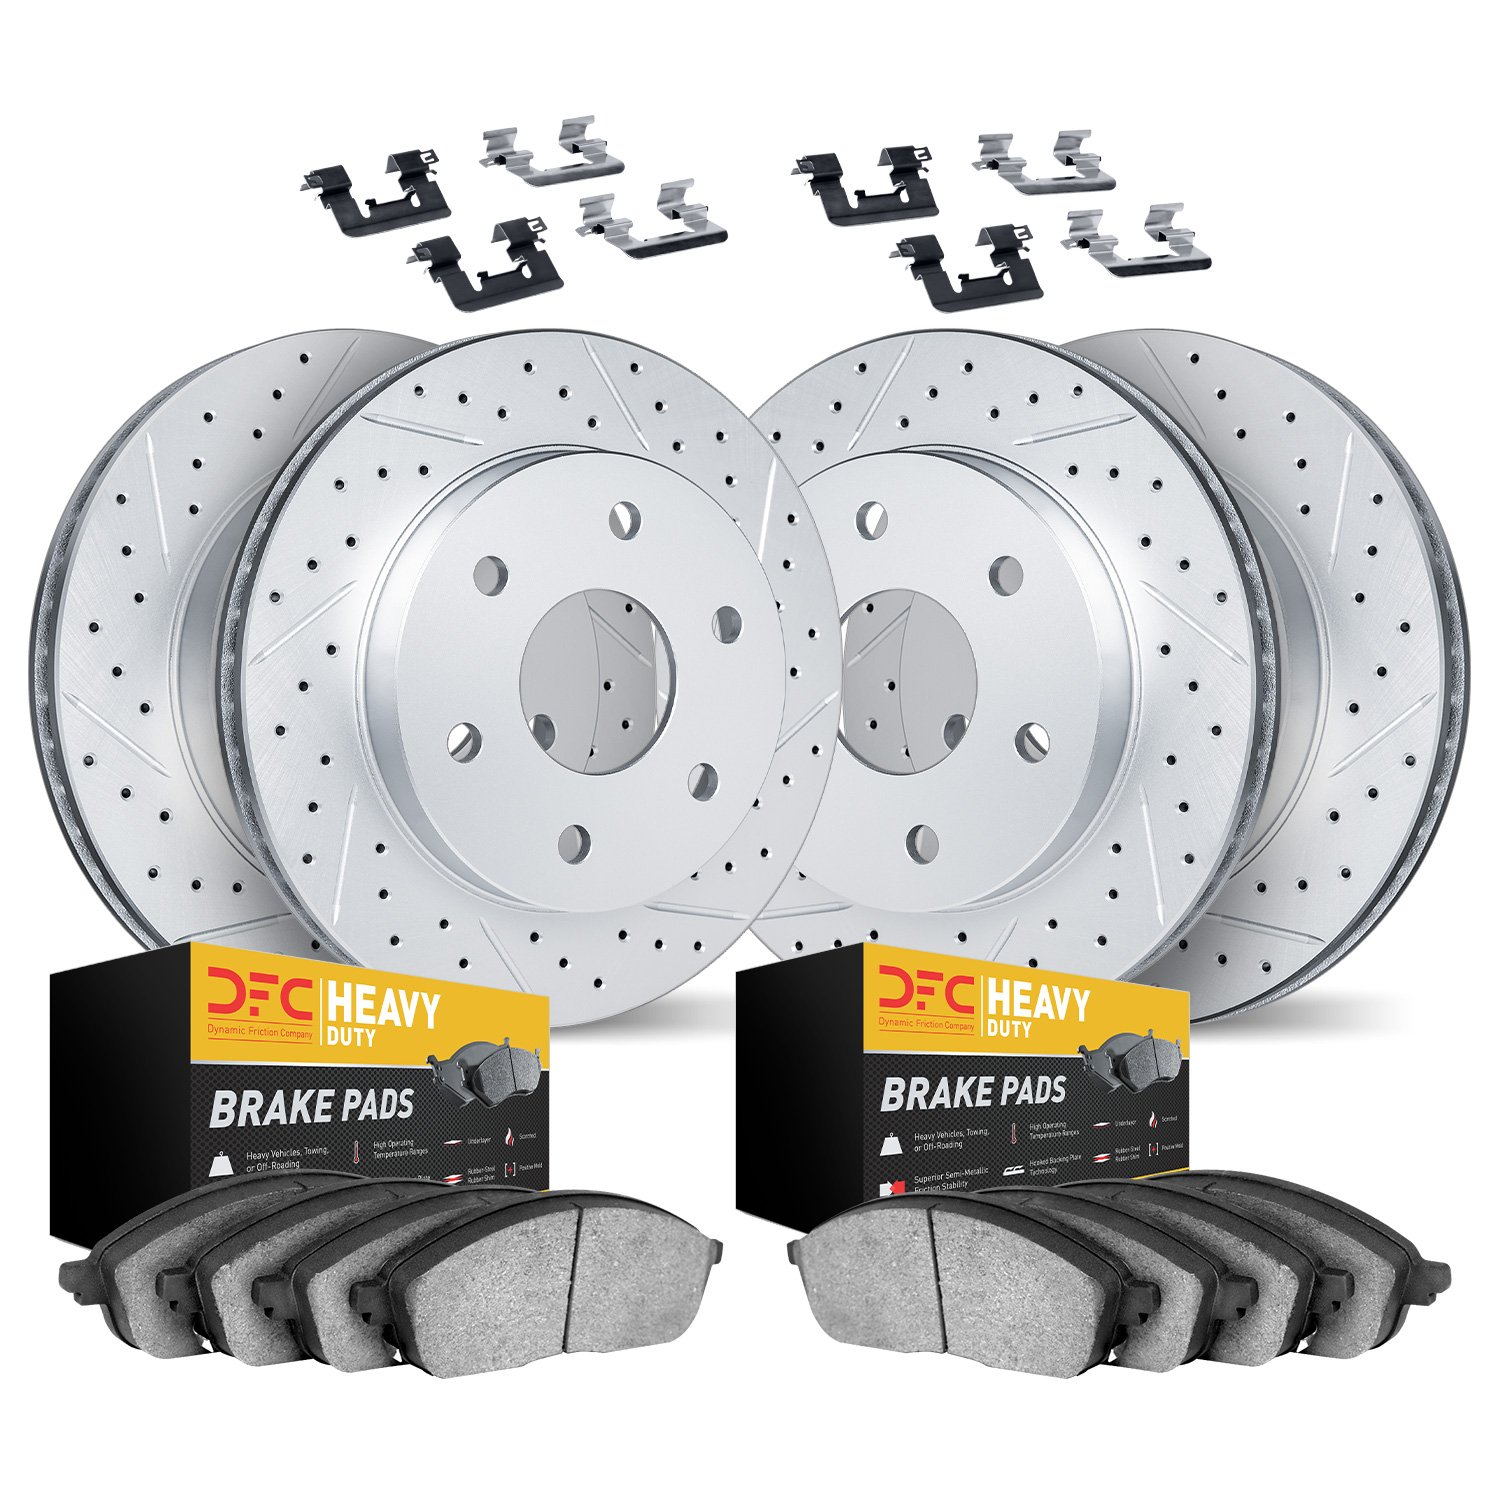 2214-99089 Geoperformance Drilled/Slotted Rotors w/Heavy-Duty Pads Kit & Hardware, 2007-2009 Ford/Lincoln/Mercury/Mazda, Positio